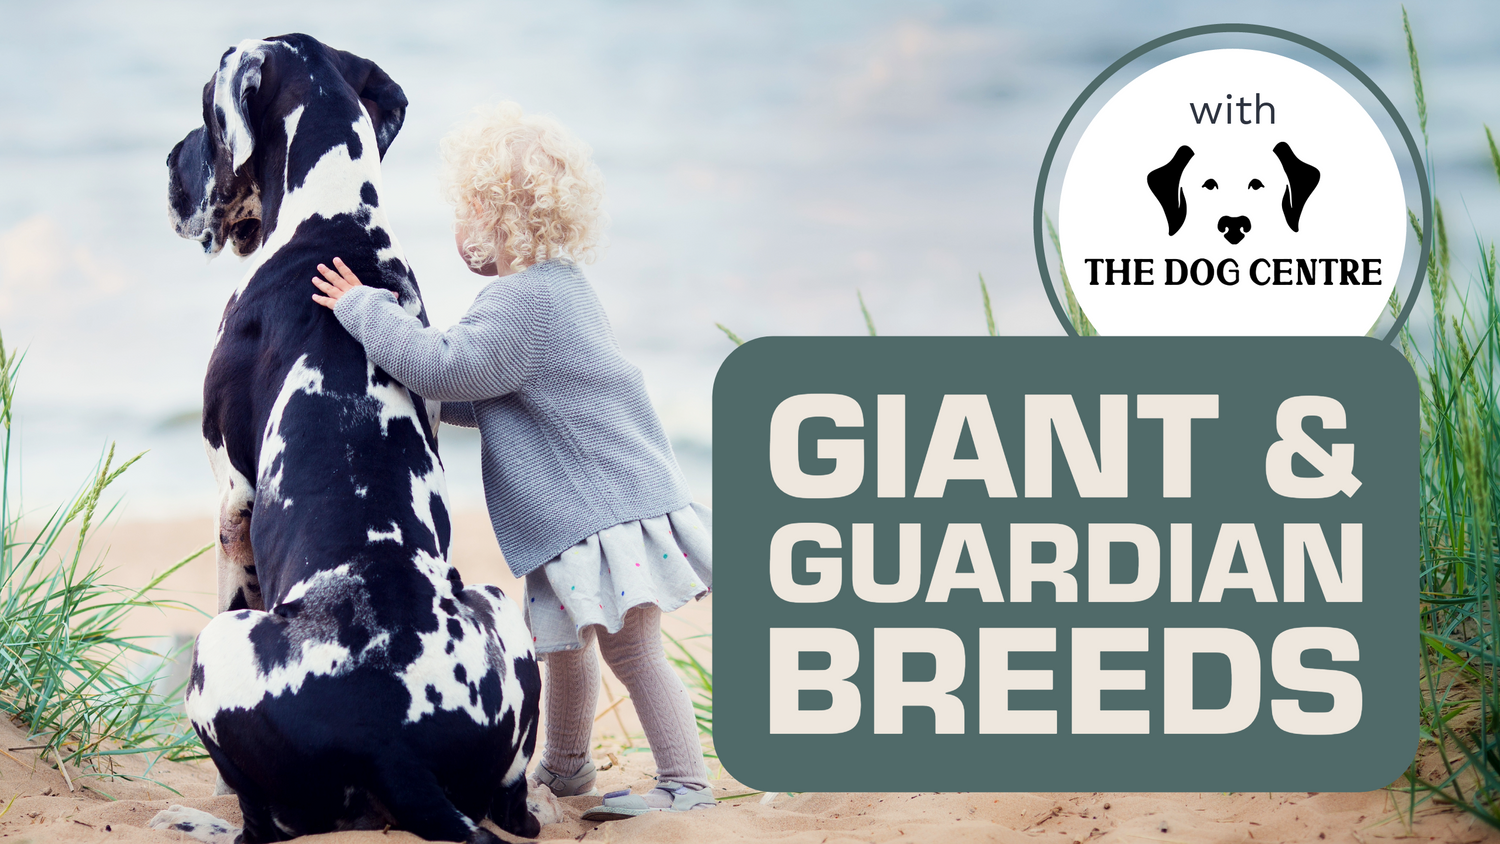 A Great Dane is sitting on a beach with a kid smaller then him hugging him and a box with text “Giant & Guardian Breeds”